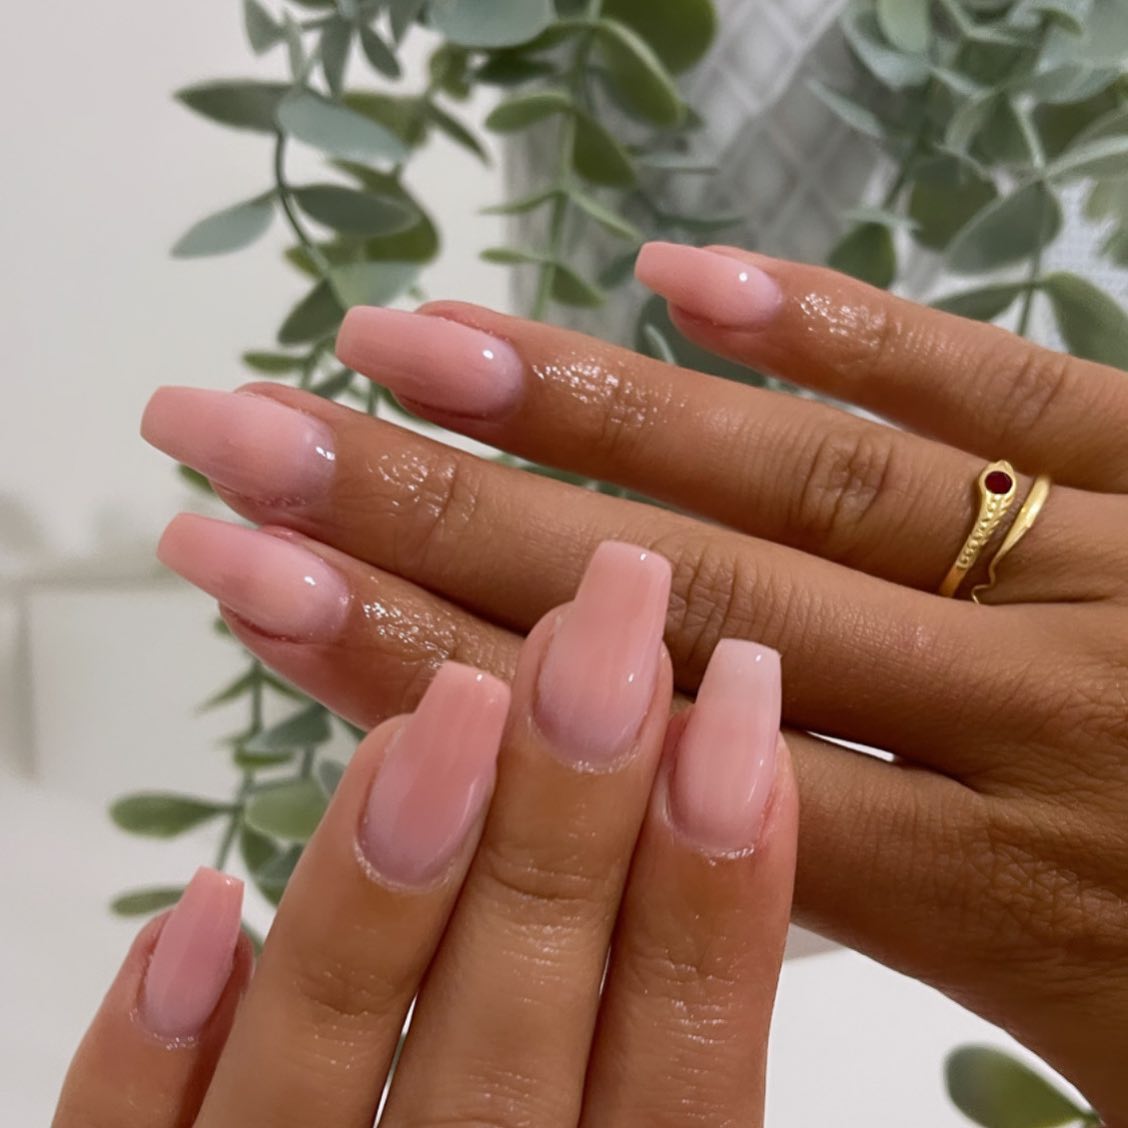 Opallac Nude Sheer Gel Polish - Barely There